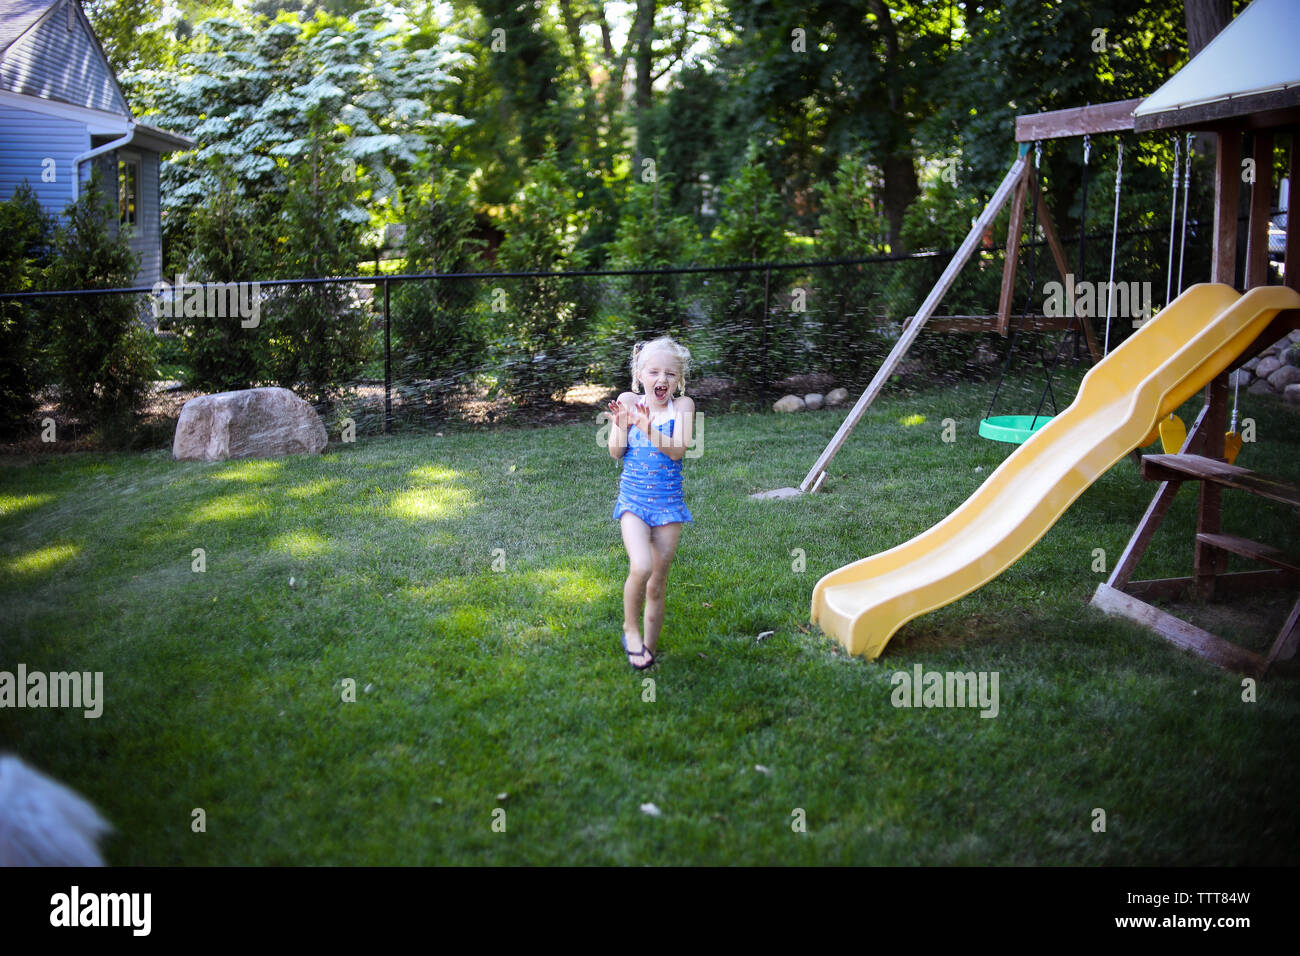 Cute girl screaming while standing on grassy field at playground Stock Photo